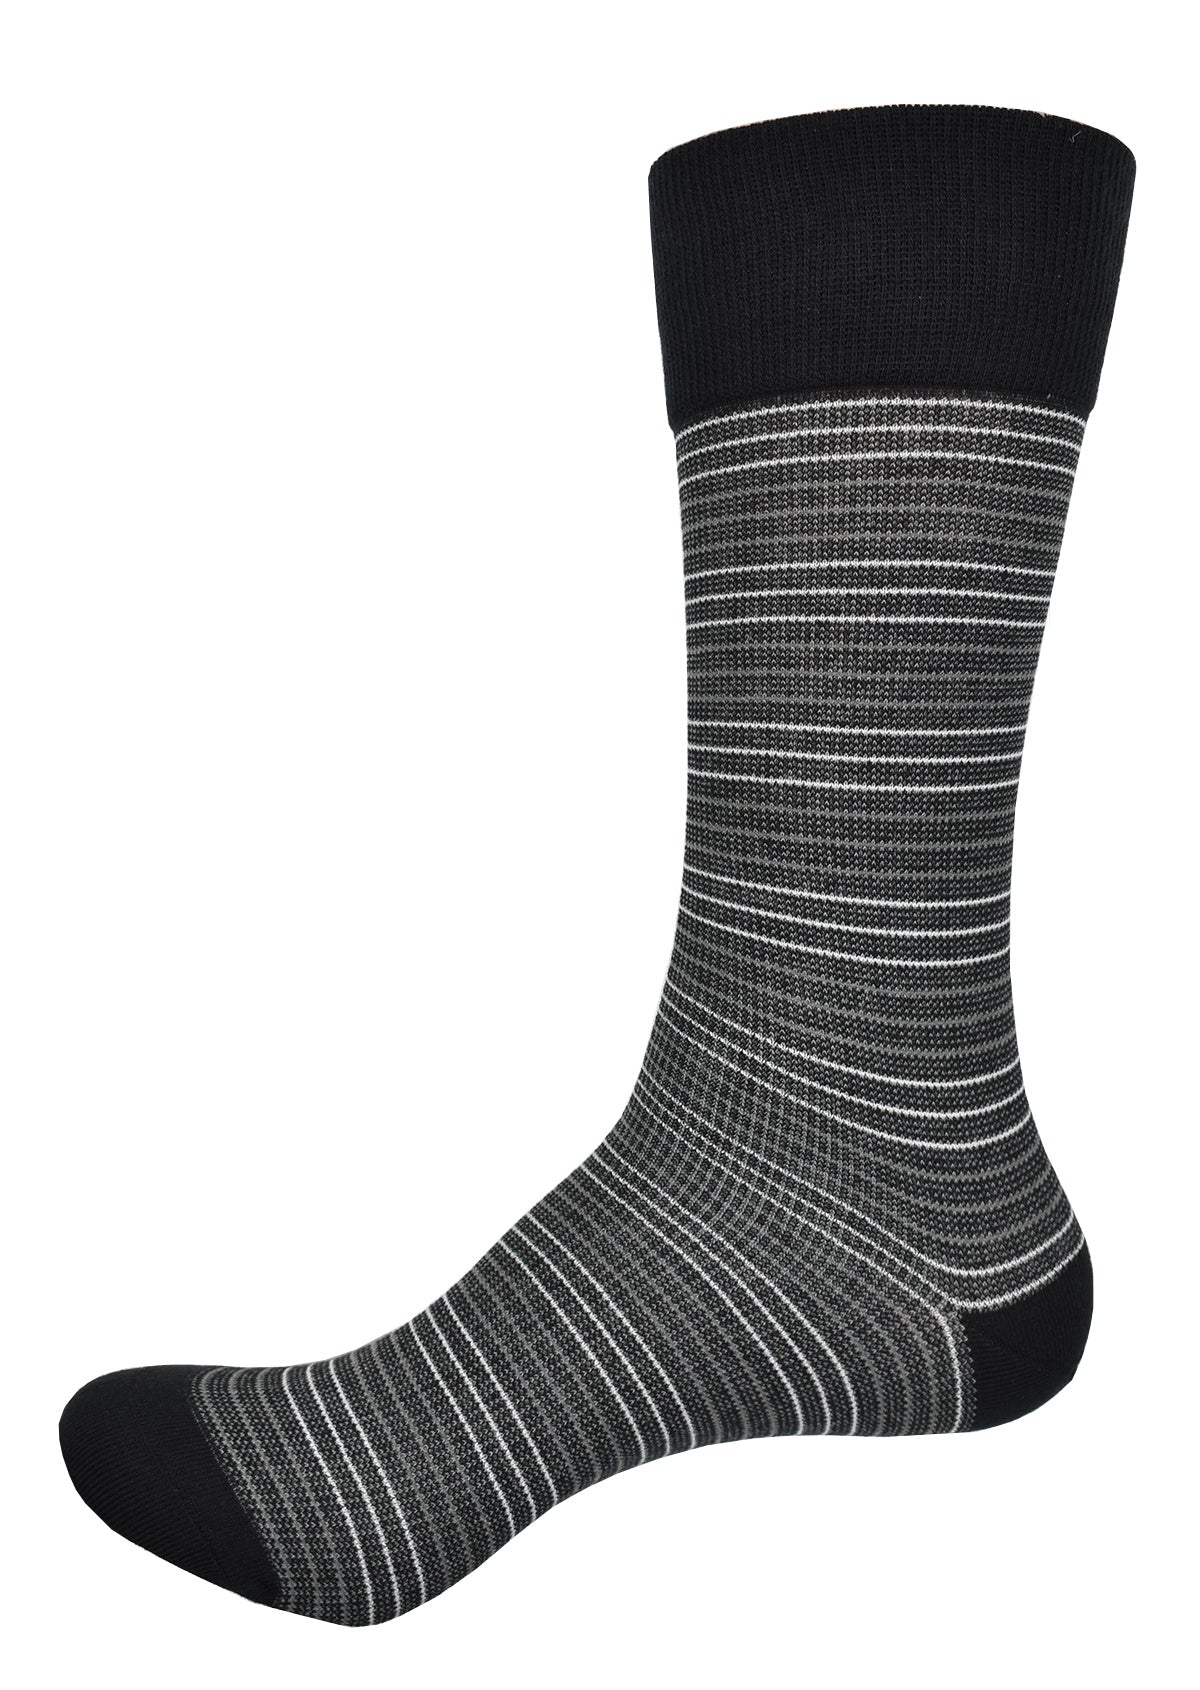 Rich and elegant fine stripe in black with white for unique fashion statement that clean and timeless.  Soft mercerized cotton. Classic timeless pattern. Mid calf height. Fits sizes 9 - 12.